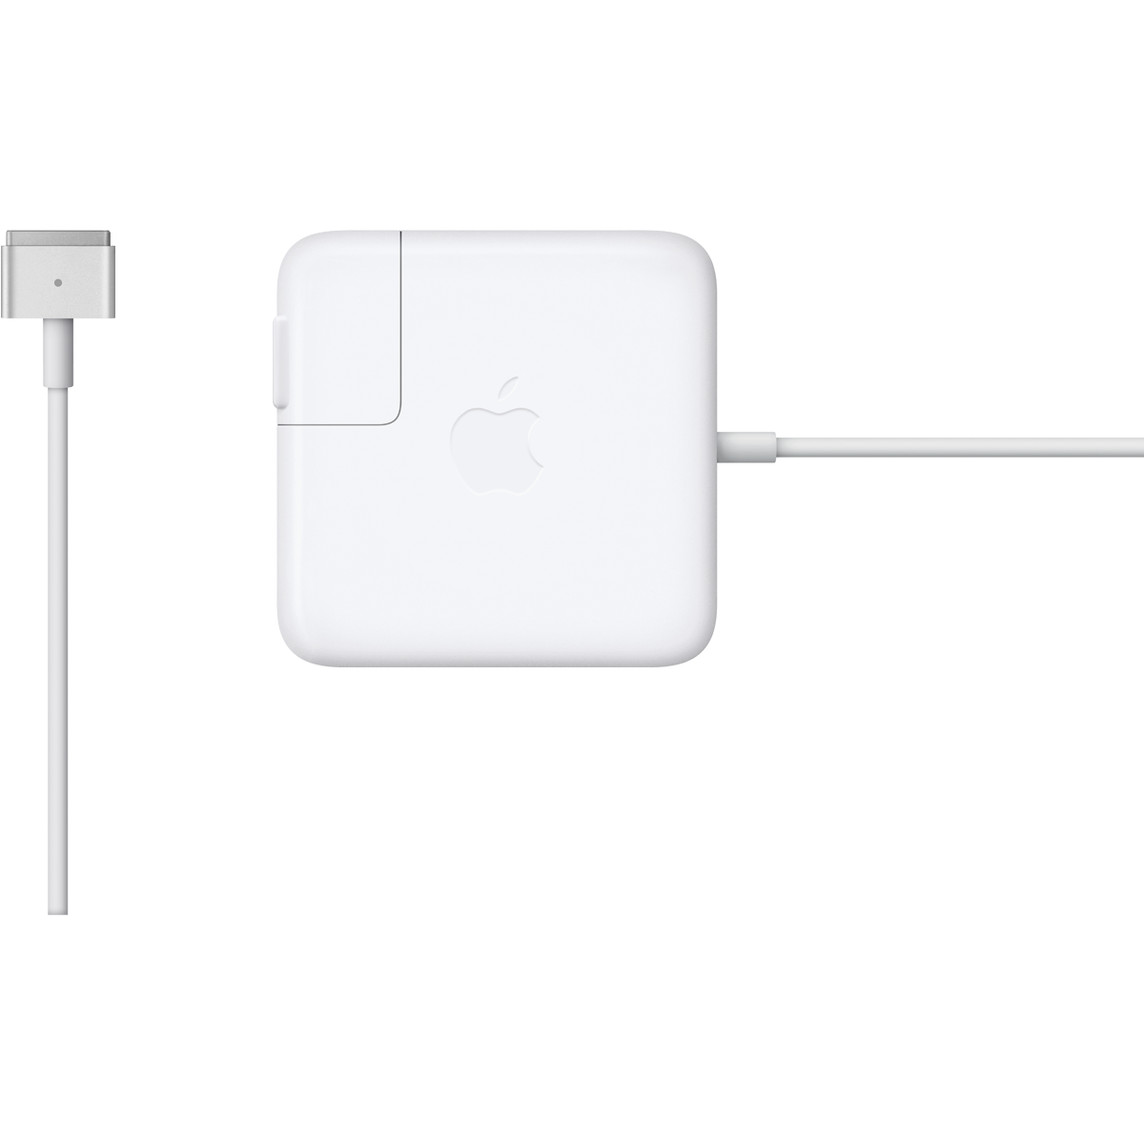 Charger for laptop APPLE (20V 4.25A 85W) Magsafe 2 T type